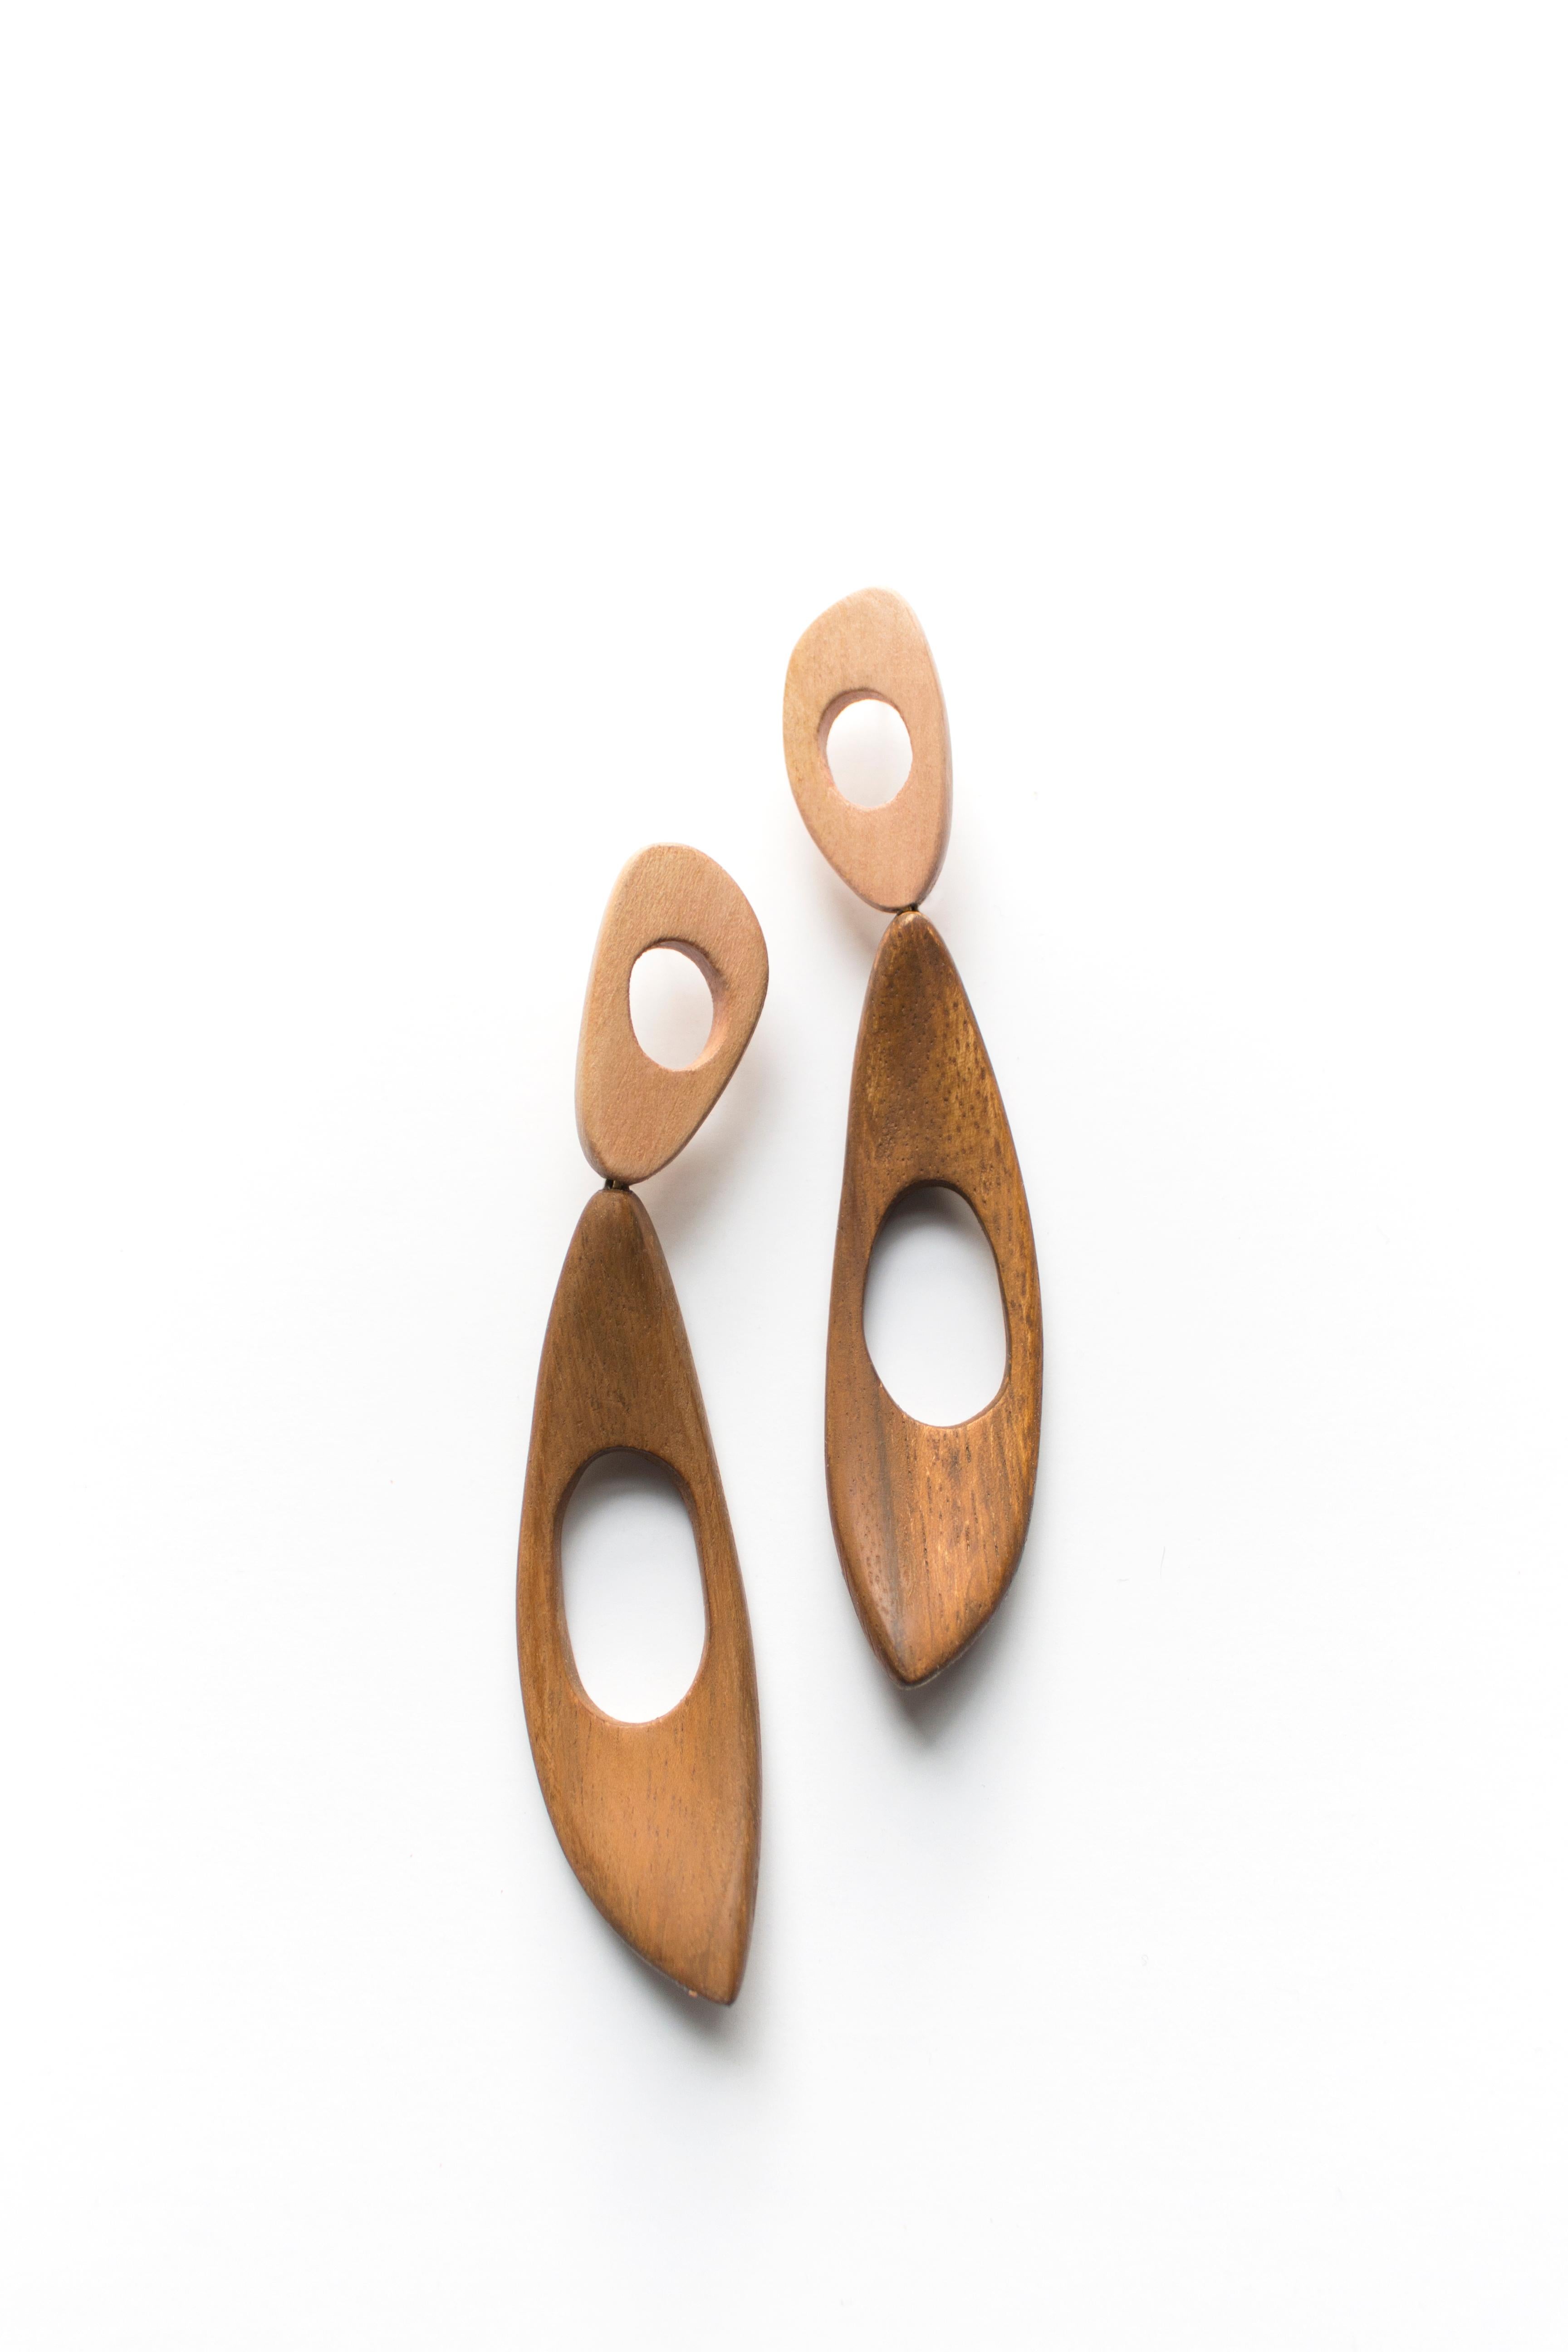 Long wood drop earrings inspired by the mid-century surfboard aesthetic.  Hand carved amoebic birch studs paired with large dangling sculpted acacia. Hypoallergenic stainless steel posts. 

All Hola Luna pieces are handcrafted one-off designs made